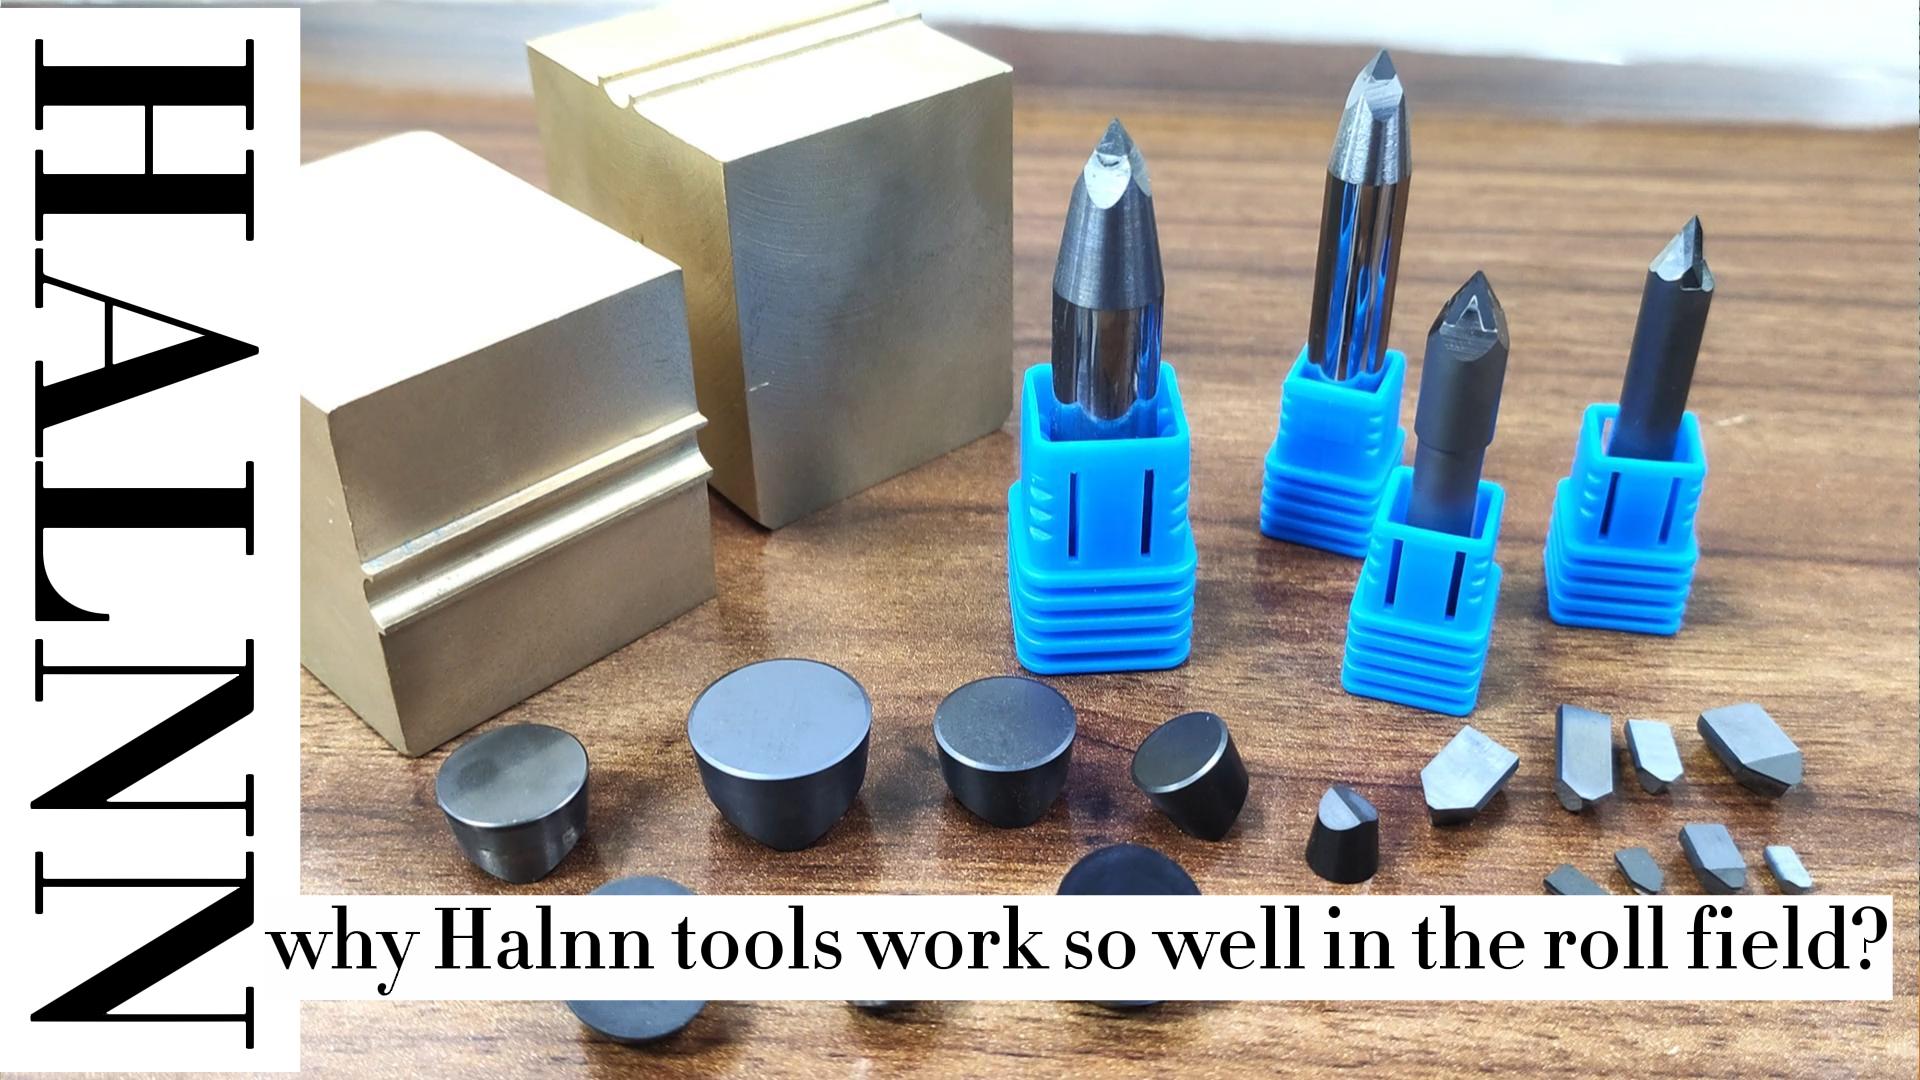 Advantages of turning rolls with Halnn CBN/PCD tools revealed